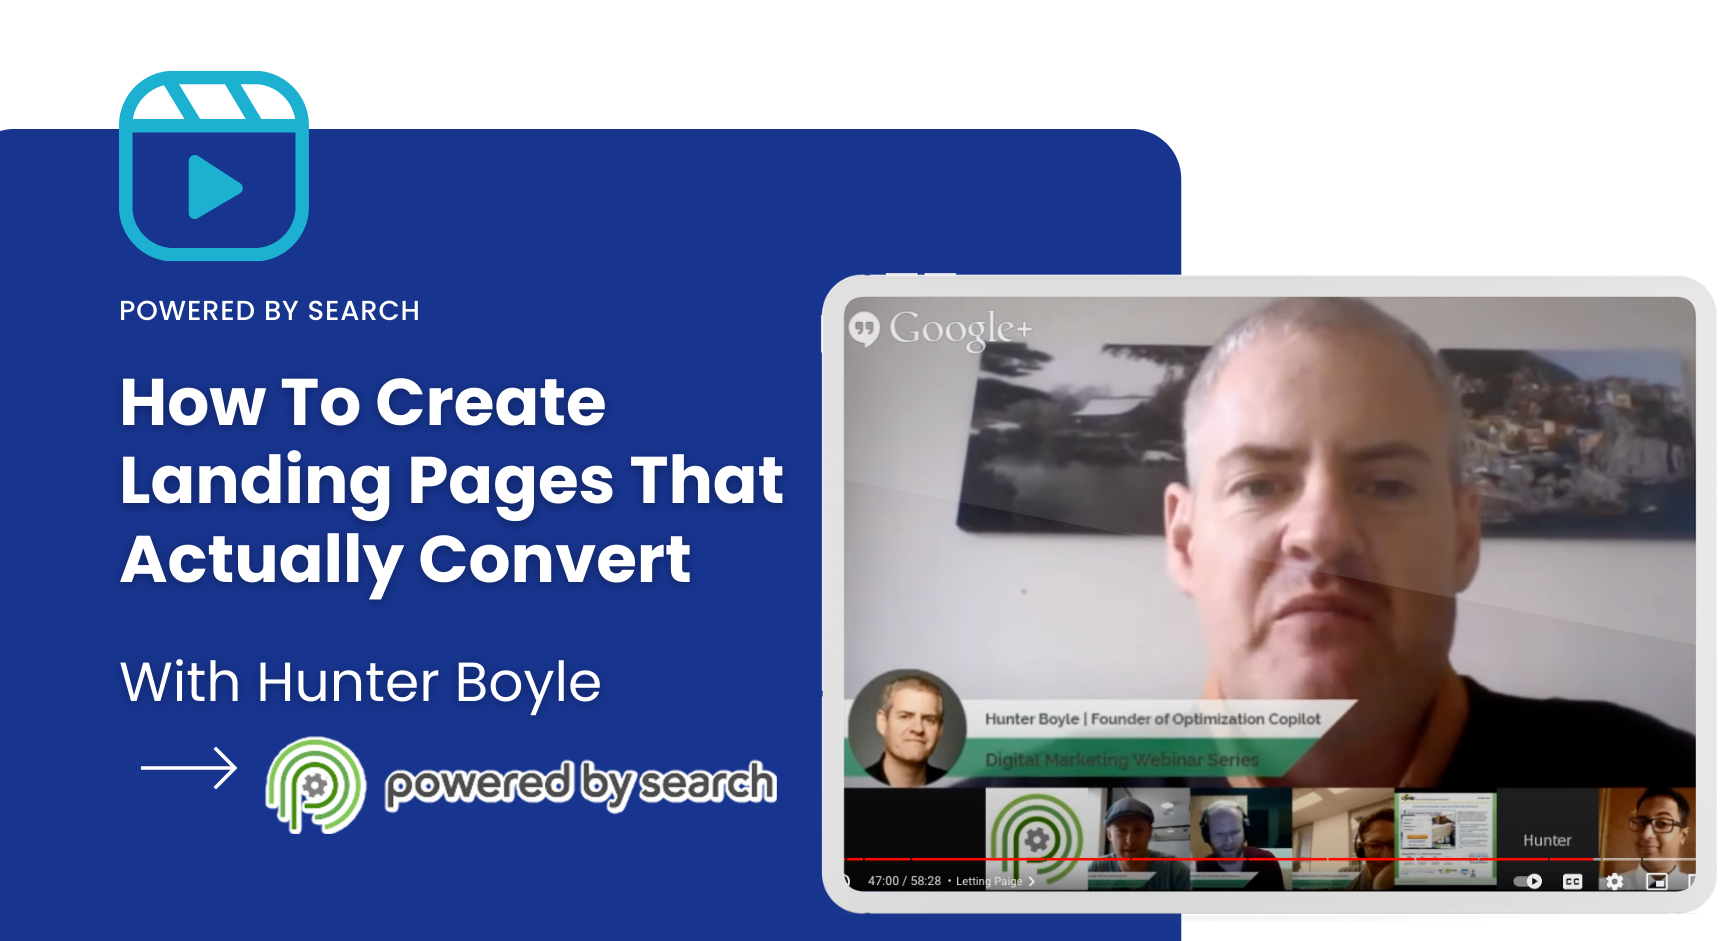 How to create landing pages that actually convert